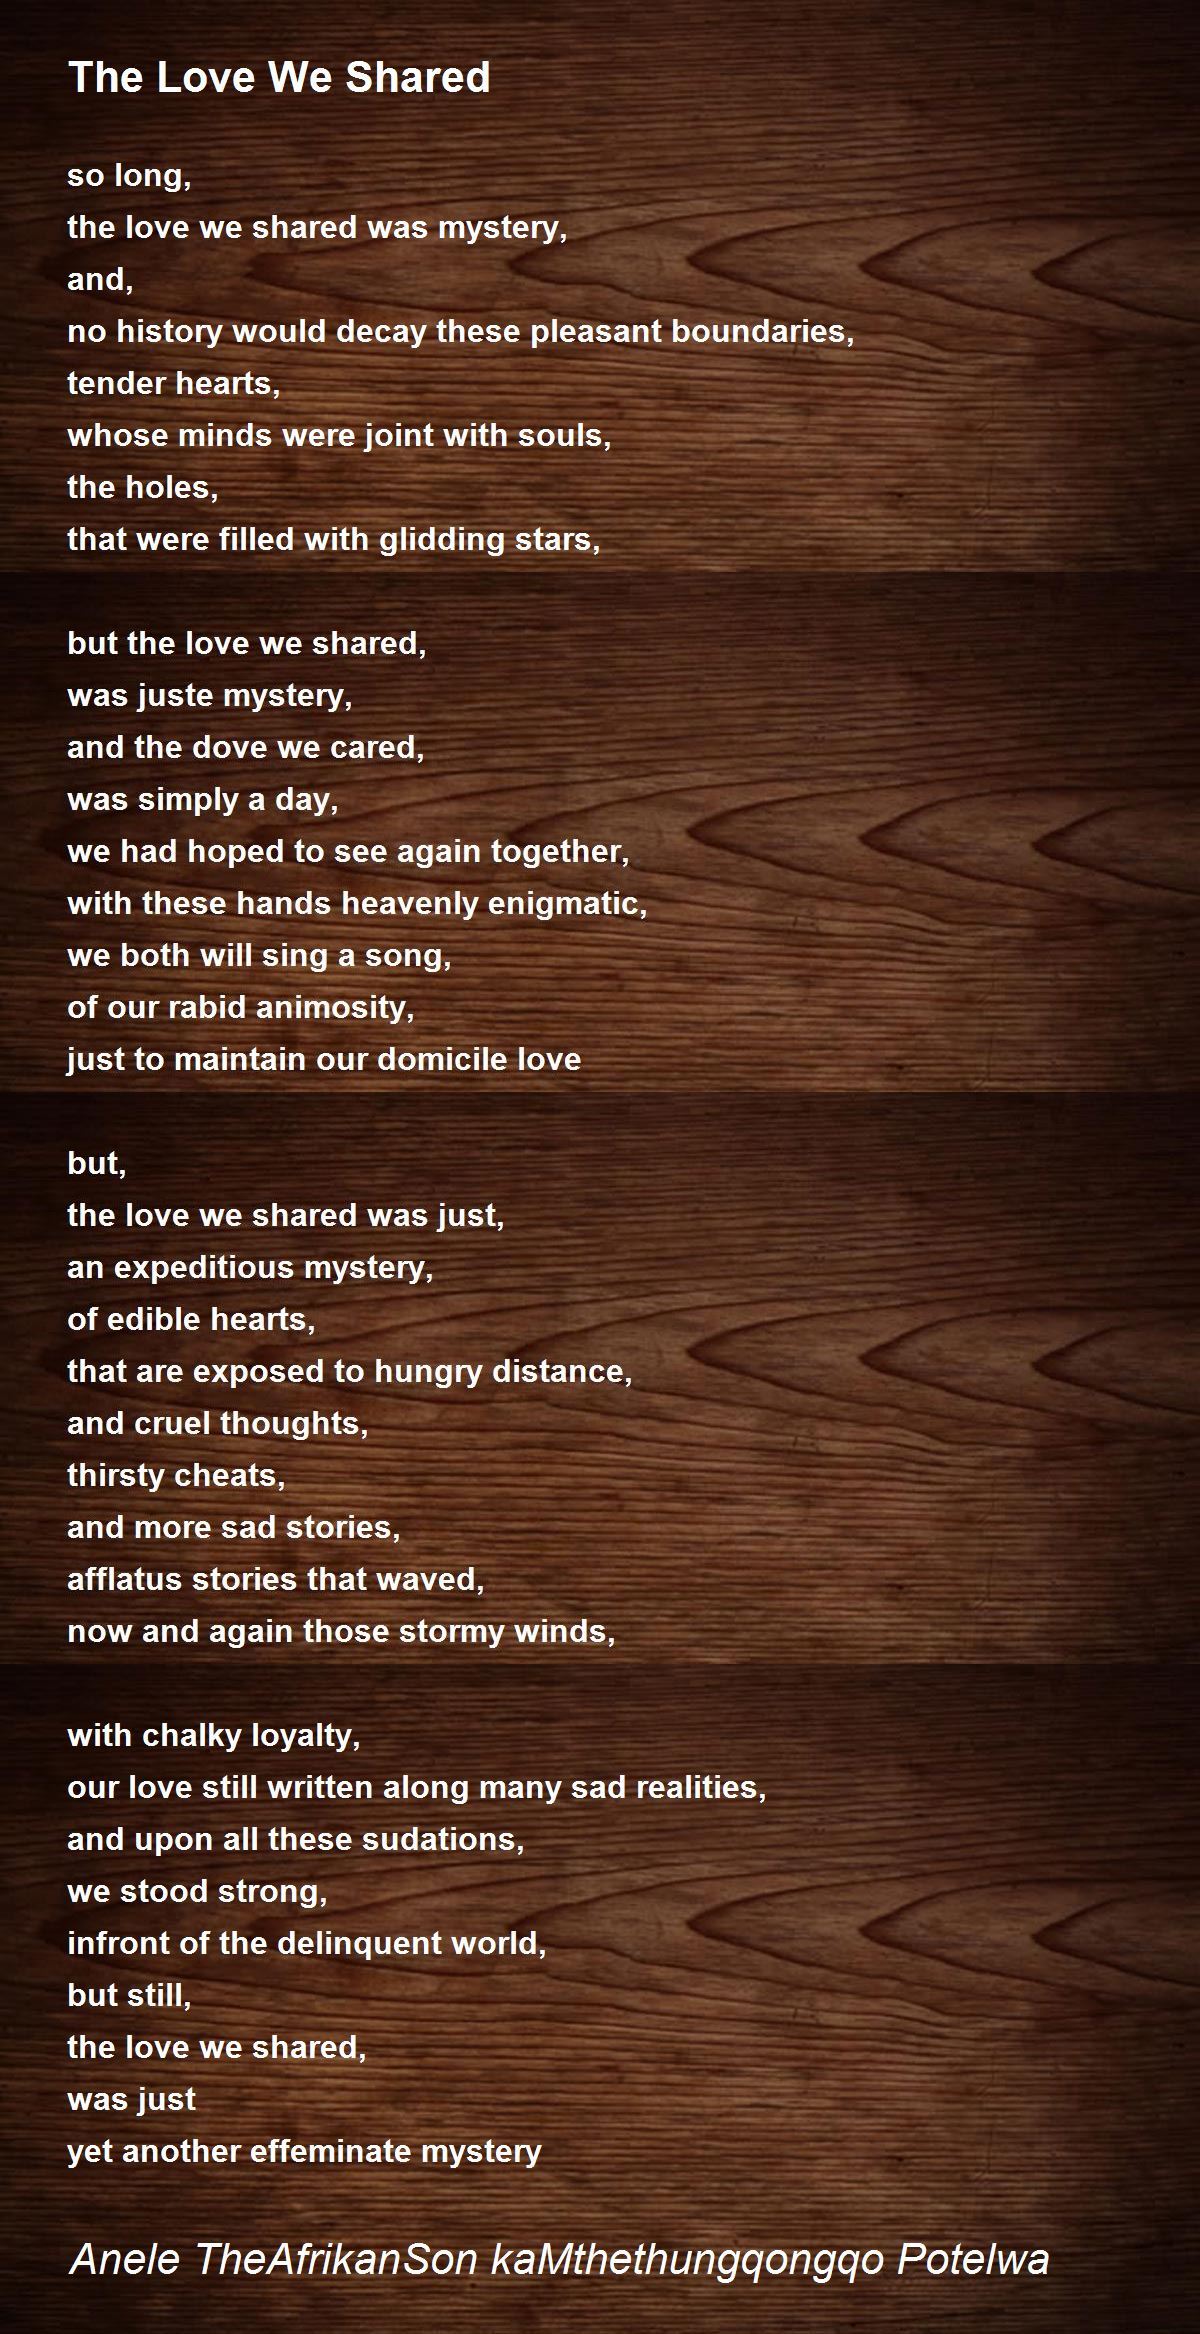 Share poem love we the 2021 Deepest